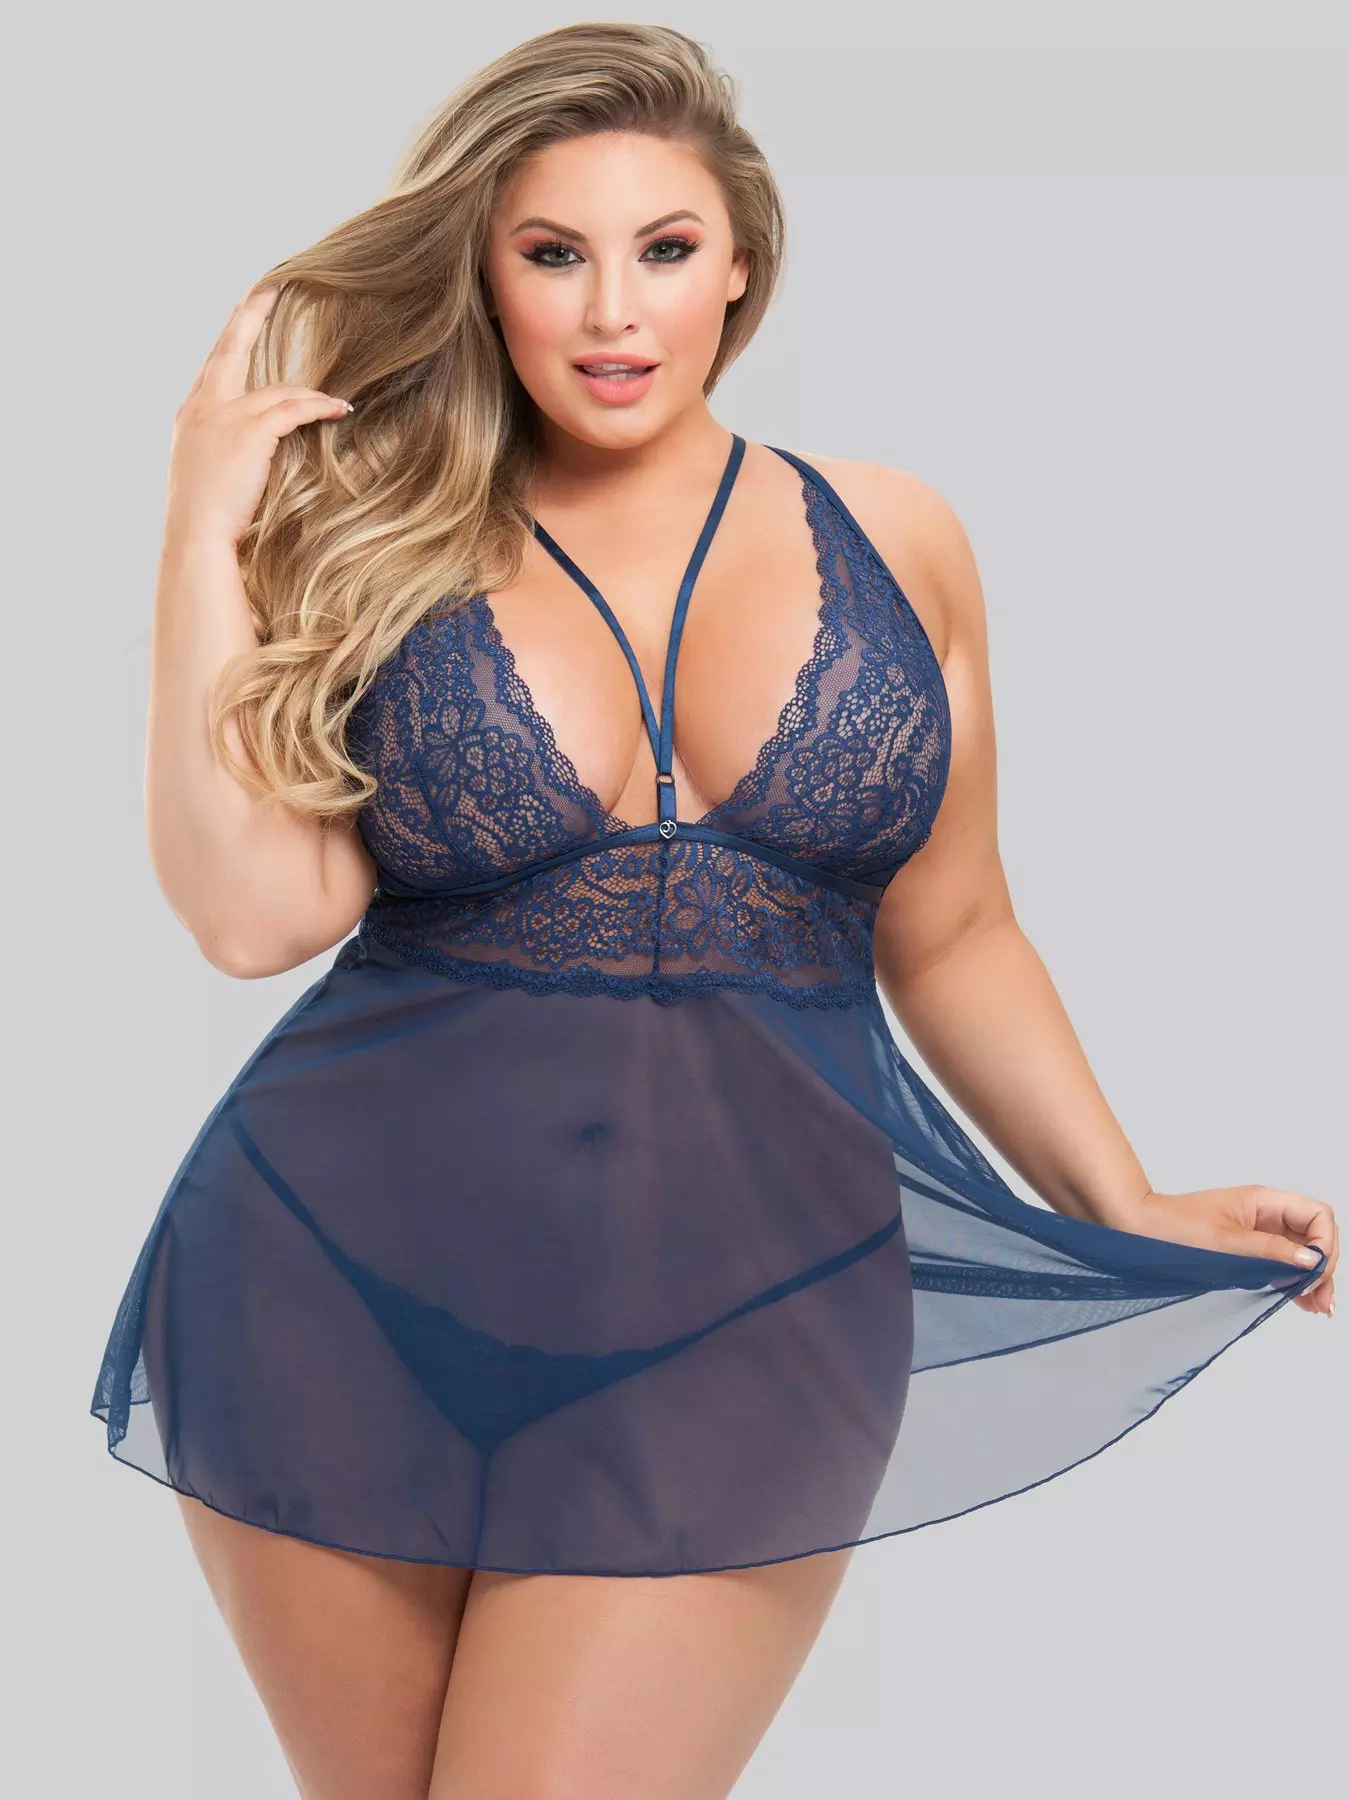 Lingerie for Big Breast Women Plus Size Lace Sexy Lingerie Mesh V-Neck  Sleeveless Front Closure Dress Sleepwear Sexy Maid Outfit Sexy Push Up Bra  and Panty Sets Light Blue S